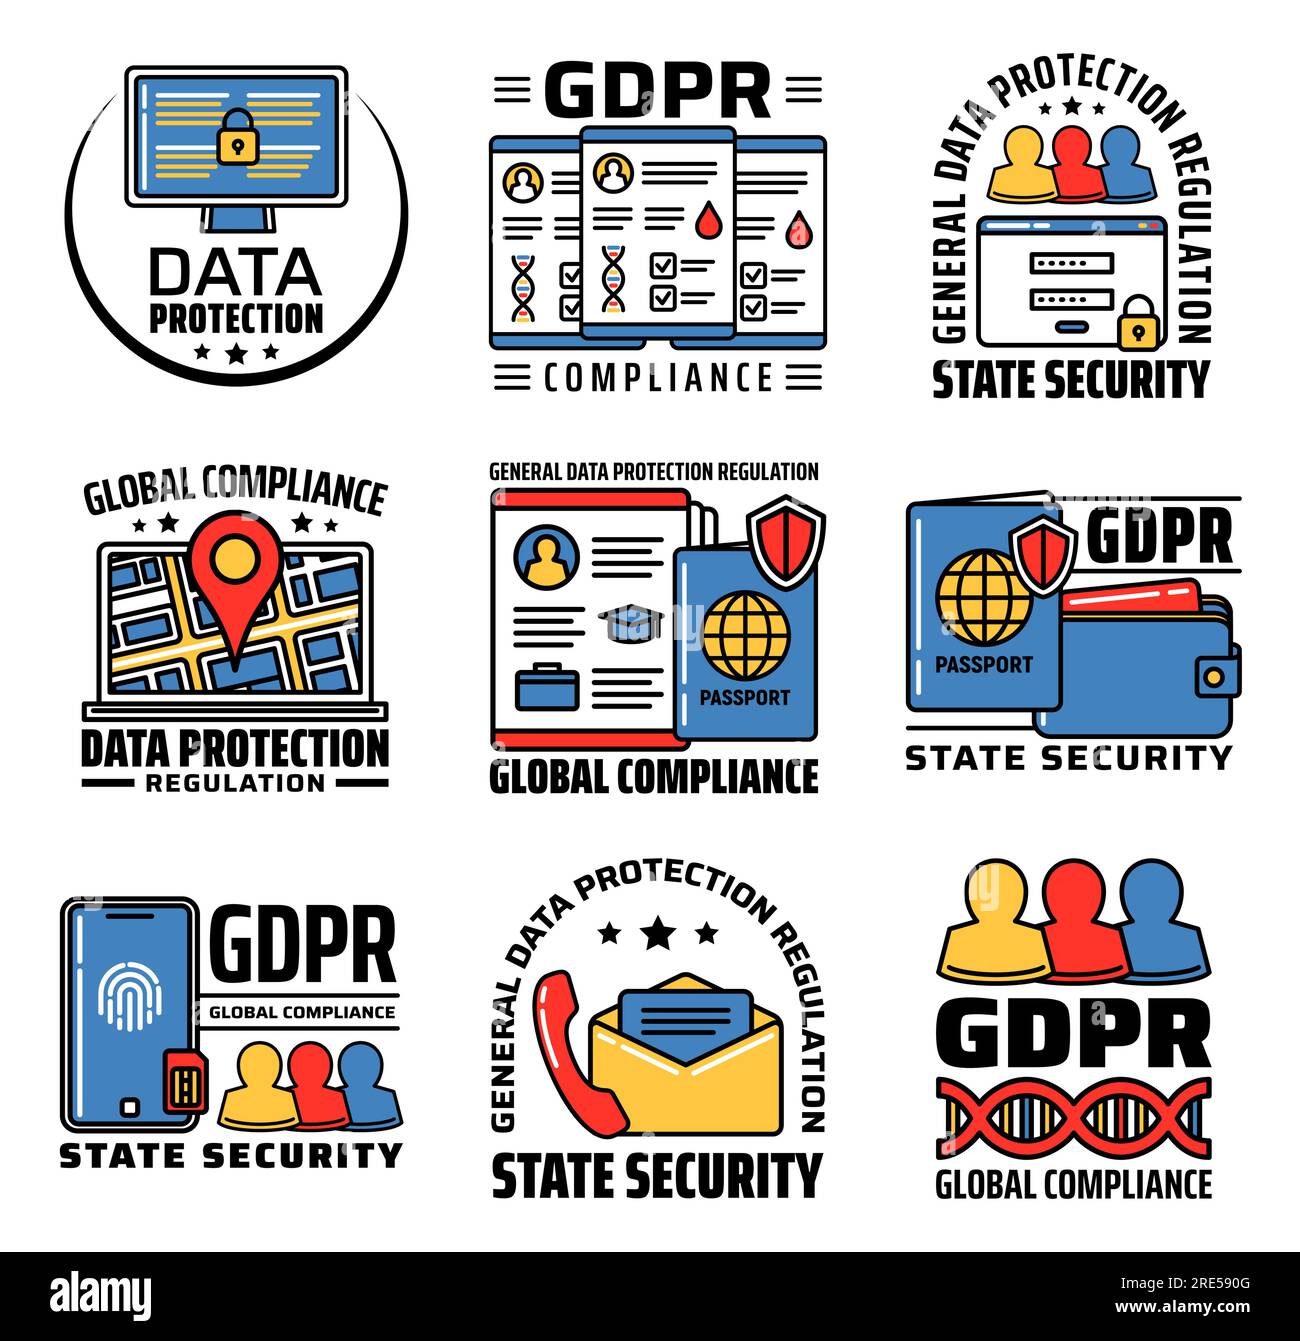 GDPR personal data protection and internet information security, vector icons. GDPR General Data Protection Regulation law on global state security, and personal data access compliance policy Stock Vector